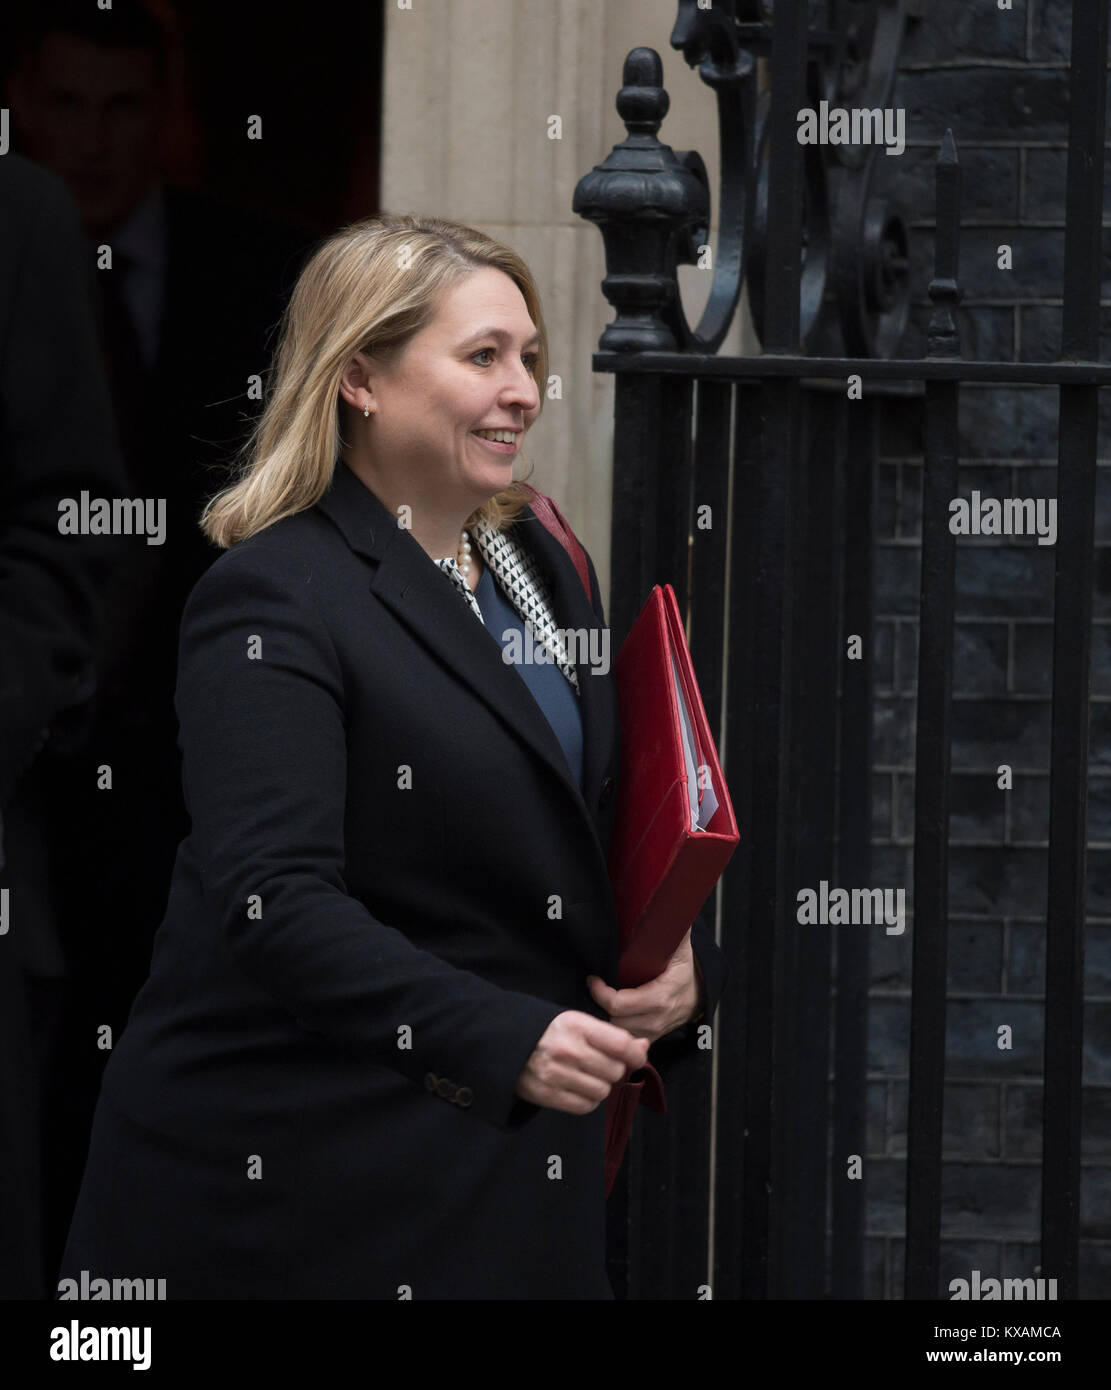 FILE: Downing Street, London, UK. 8 January, 2018. Karen Bradley, formerly Sports Minister, to become Northern Ireland Secretary in reshuffle. She is seen here arriving for cabinet meeting on 19 December 2017. Credit: Malcolm Park/Alamy Live News. Stock Photo